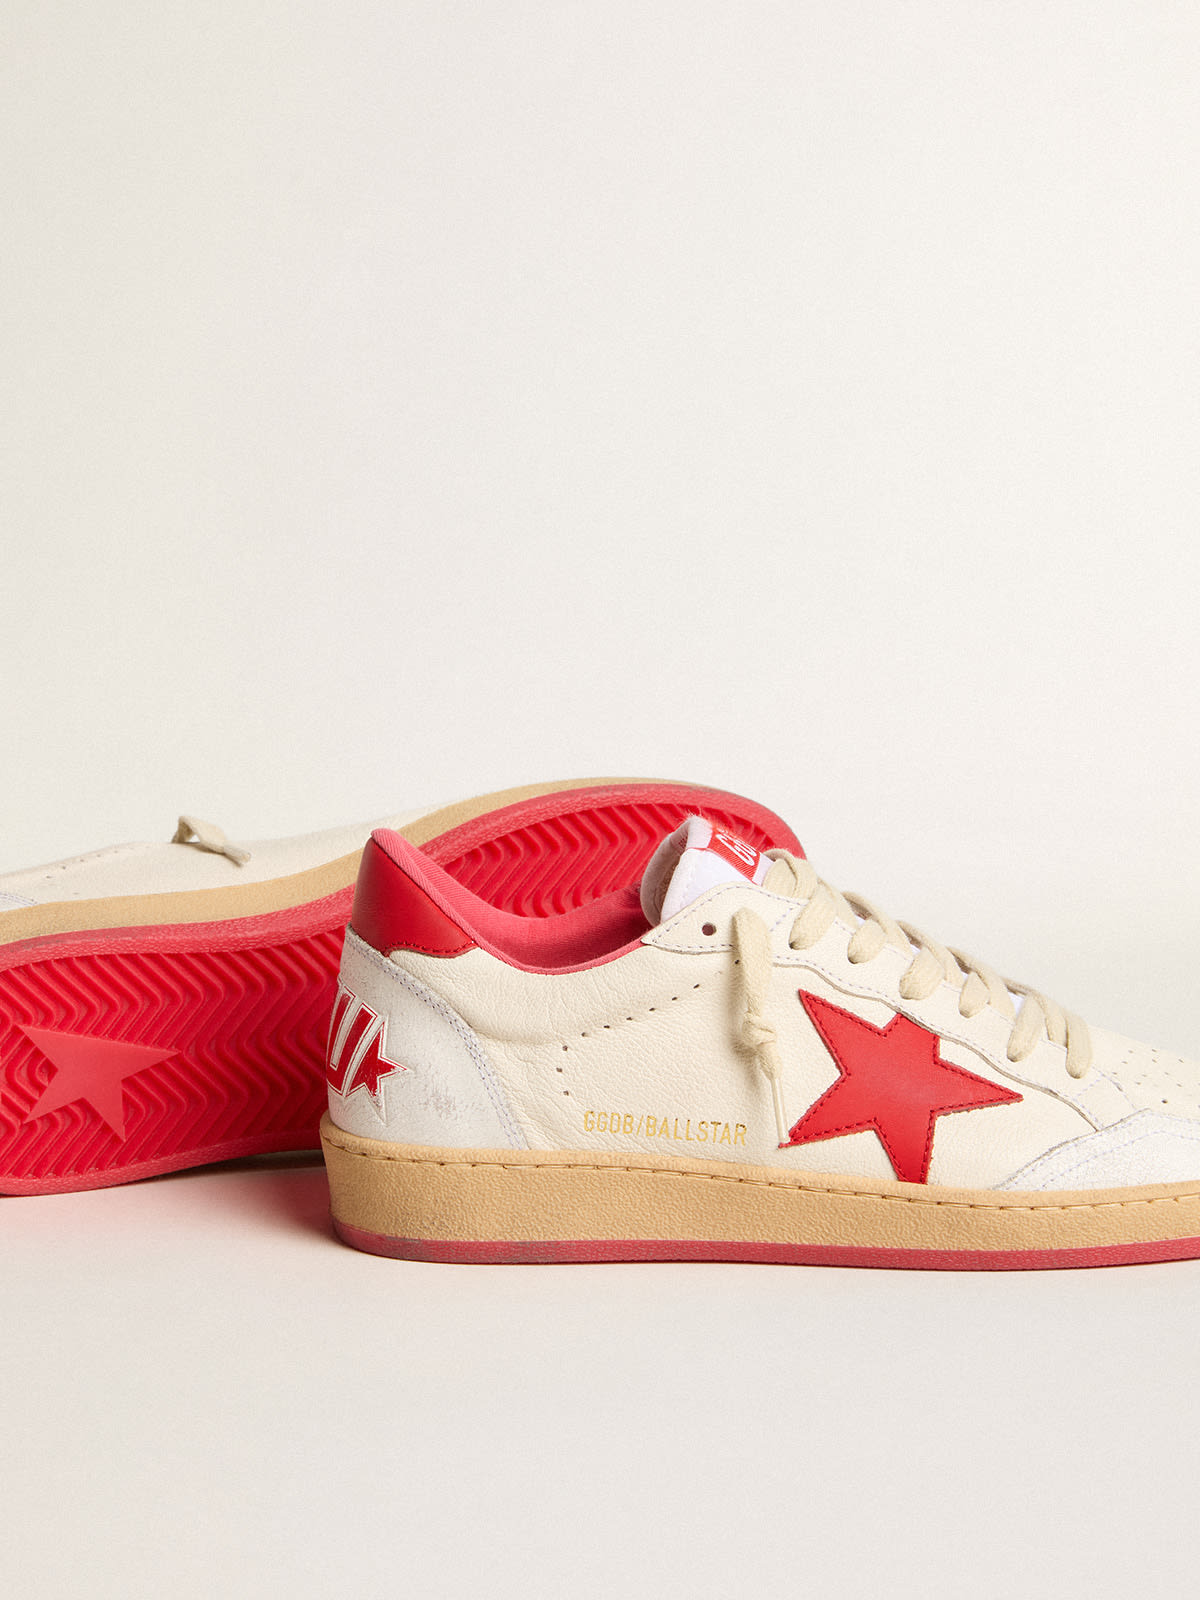 Golden Goose - Men’s Ball Star  Wishes in white leather with a red star and heel tab in 